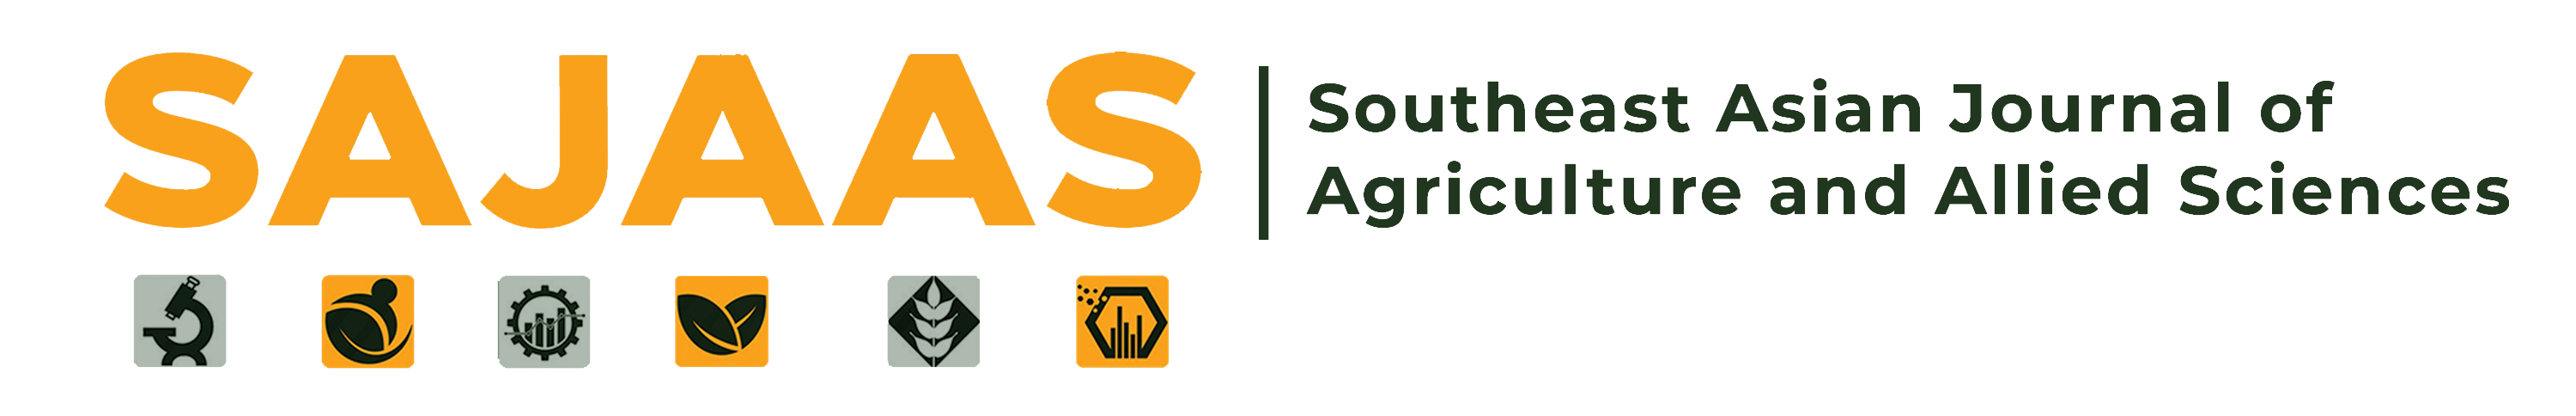 Southeast Asian Journal of Agriculture and Allied Sciences